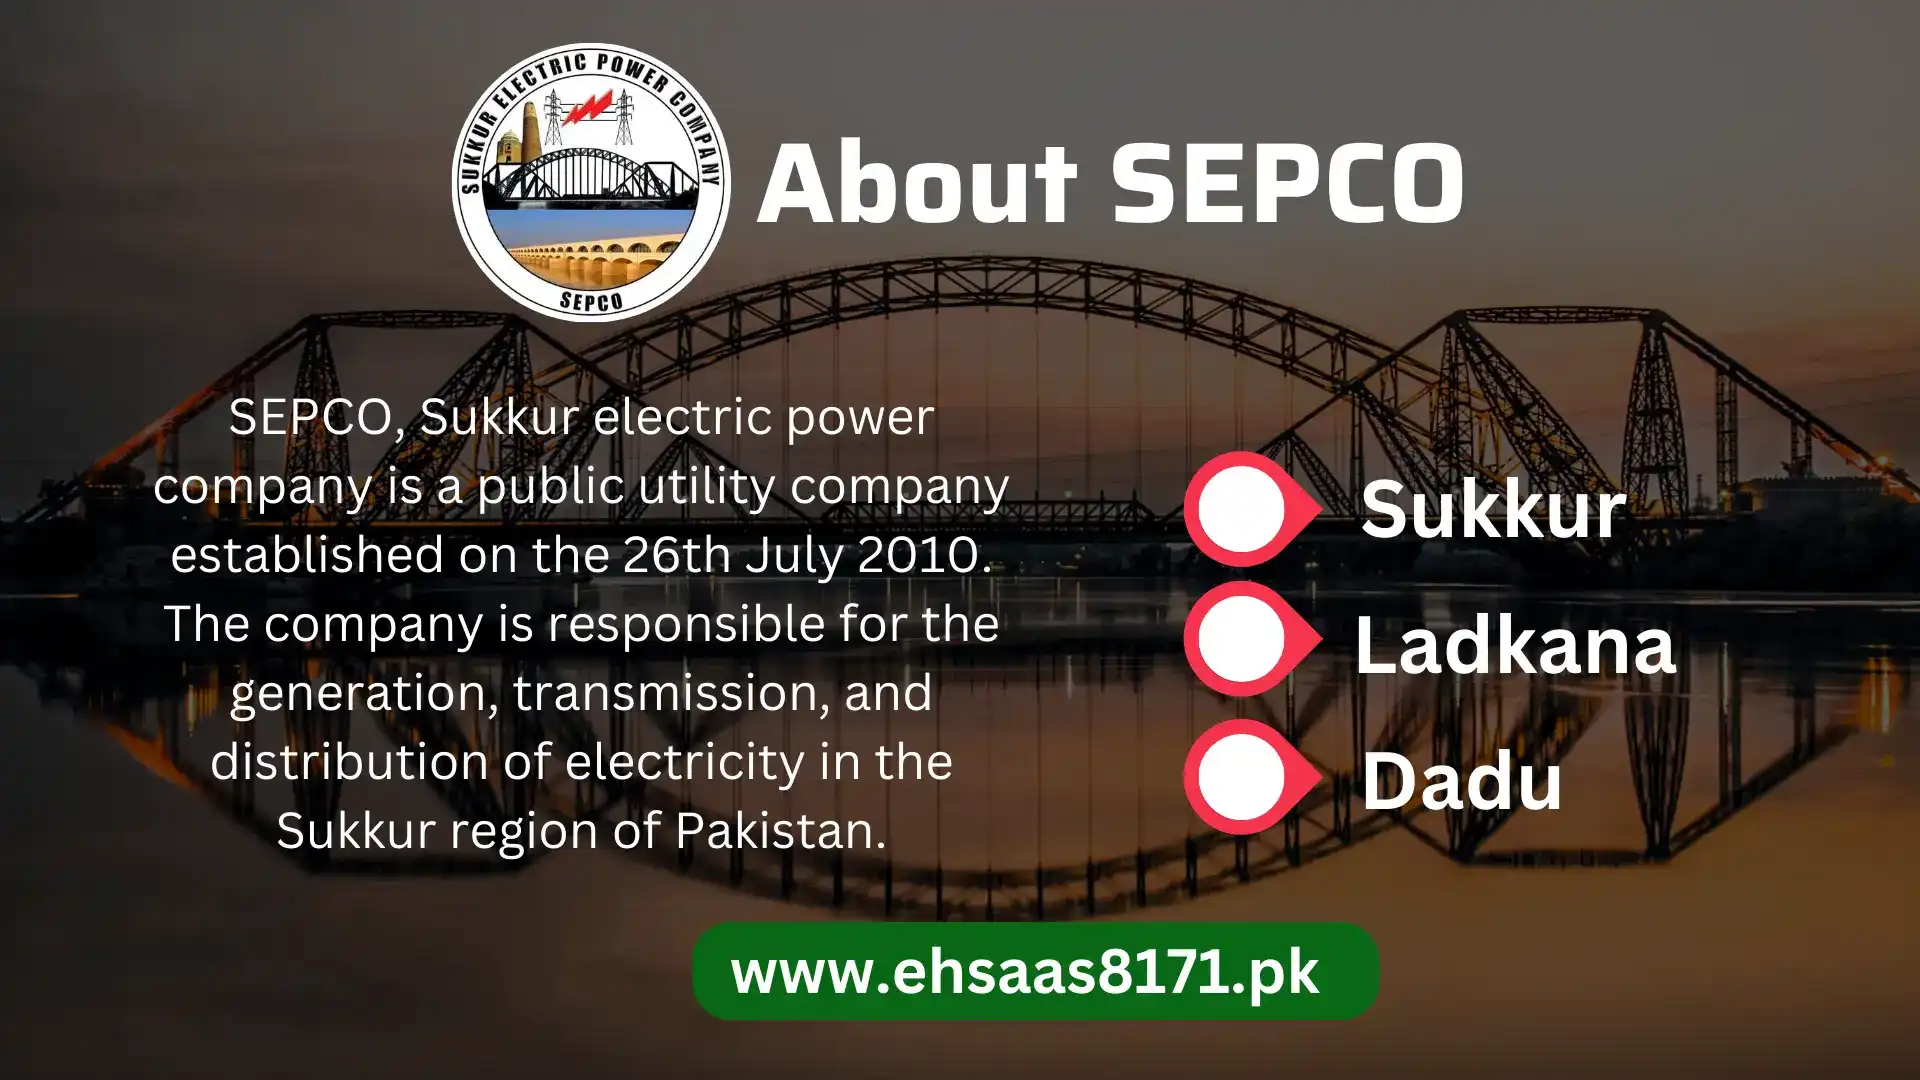 About SEPCO